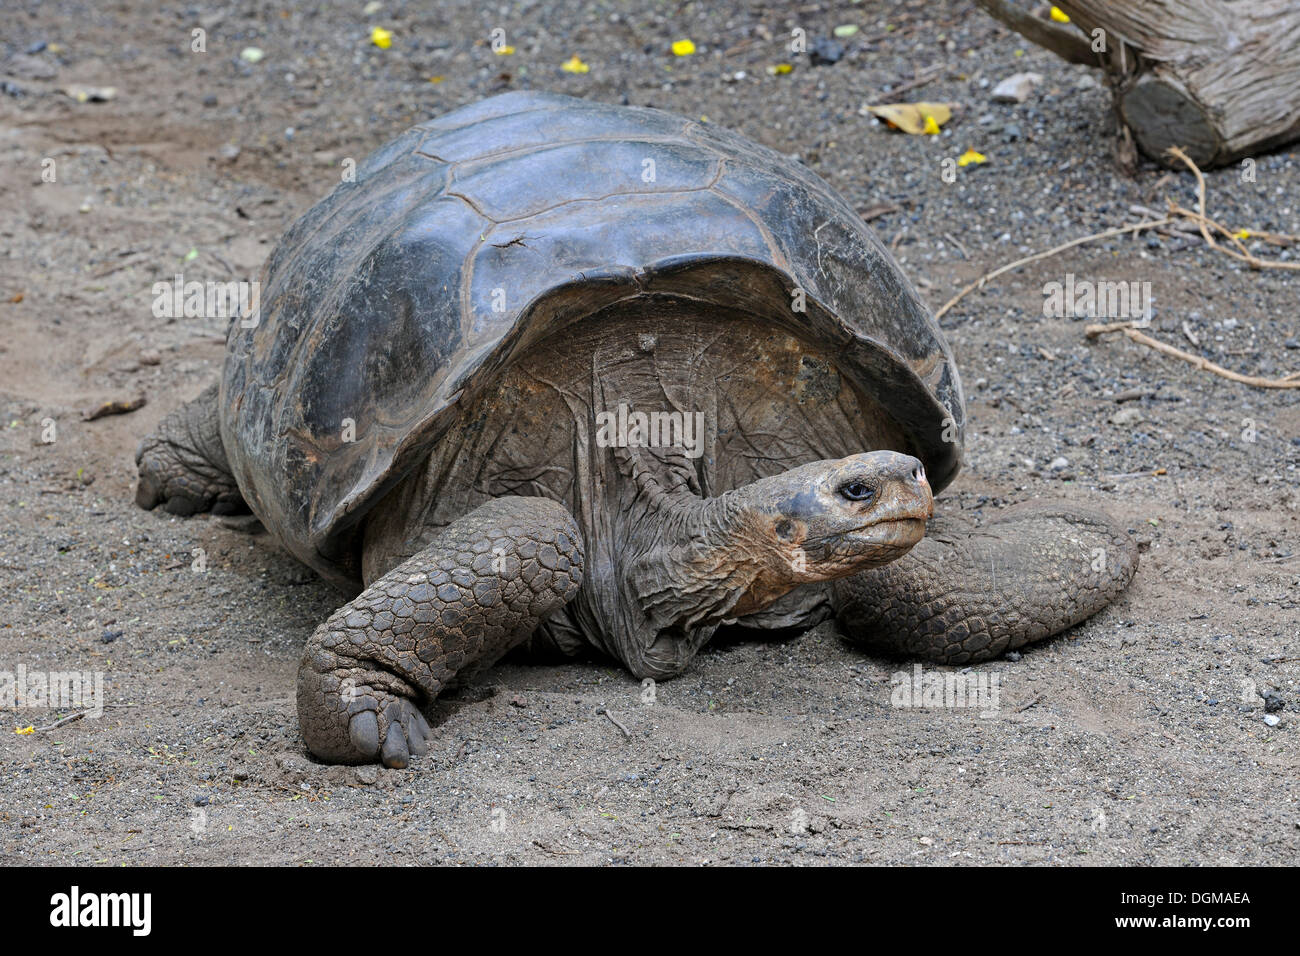 Mature specimen of the Galapagos Giant Tortoise (Geochelone elephantopus vicina), subspecies from the Cerro Azul area on Isabela Stock Photo